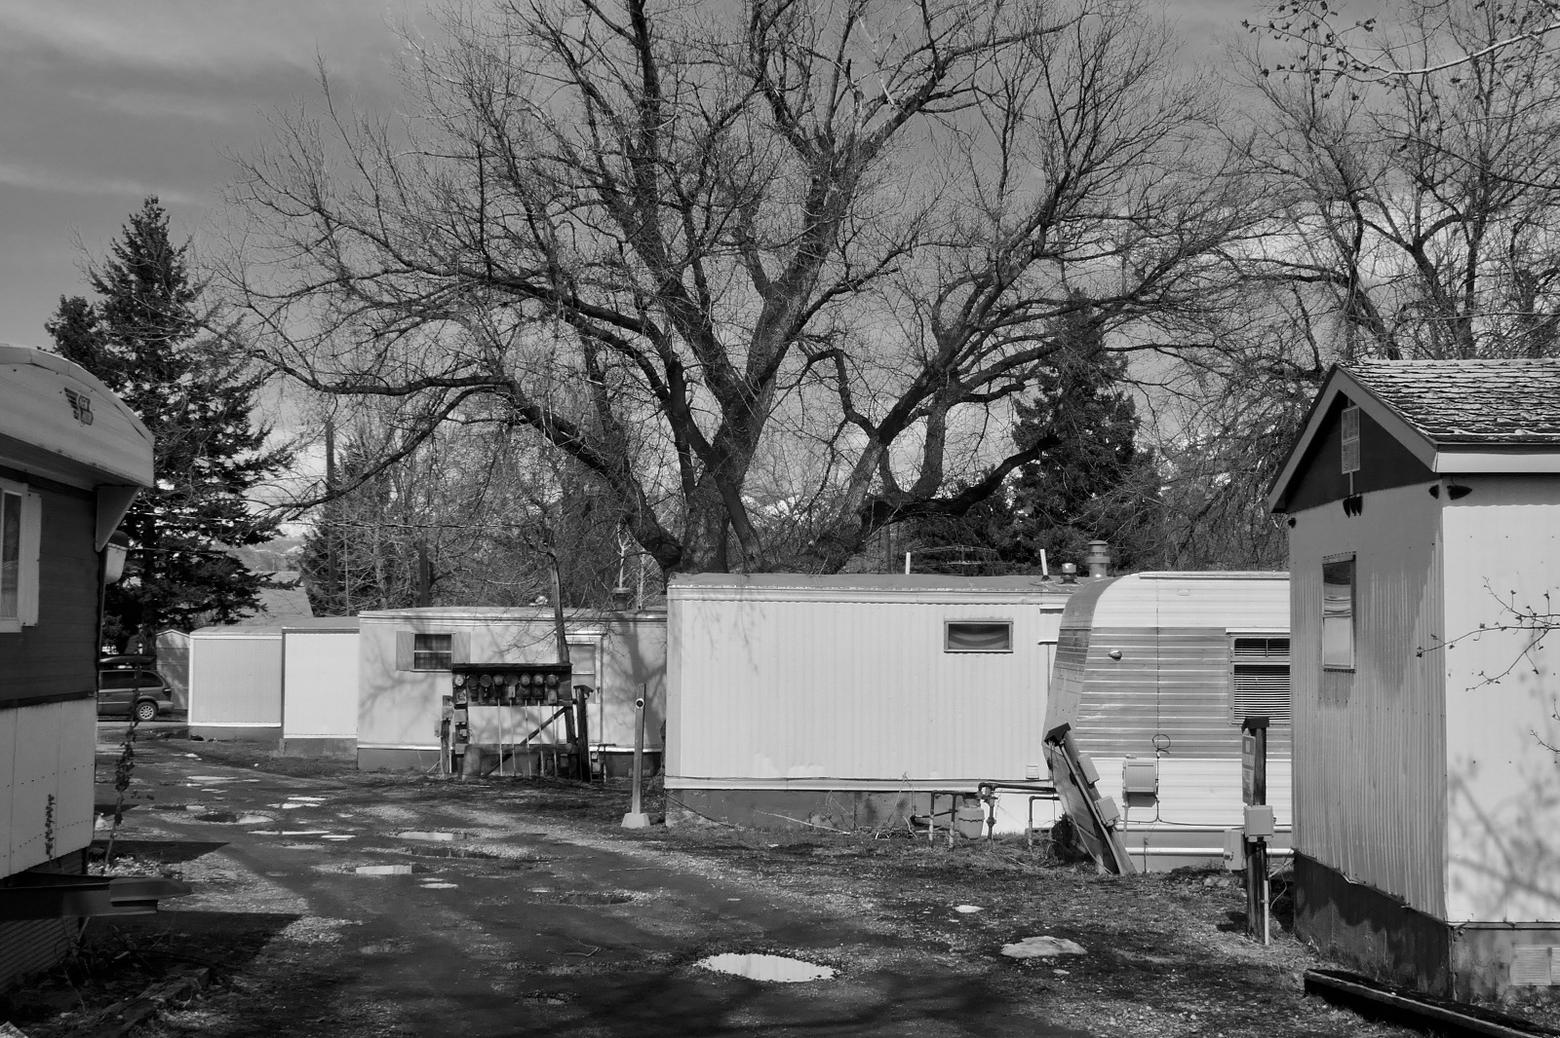 Soon this trailer park in north Bozeman will be replaced and gone too the working-class residents who called it home.  Here's a question: when gentrification pushes people out of a community, doesn't anyone notice when they leave?  Photo by Tim Crawford